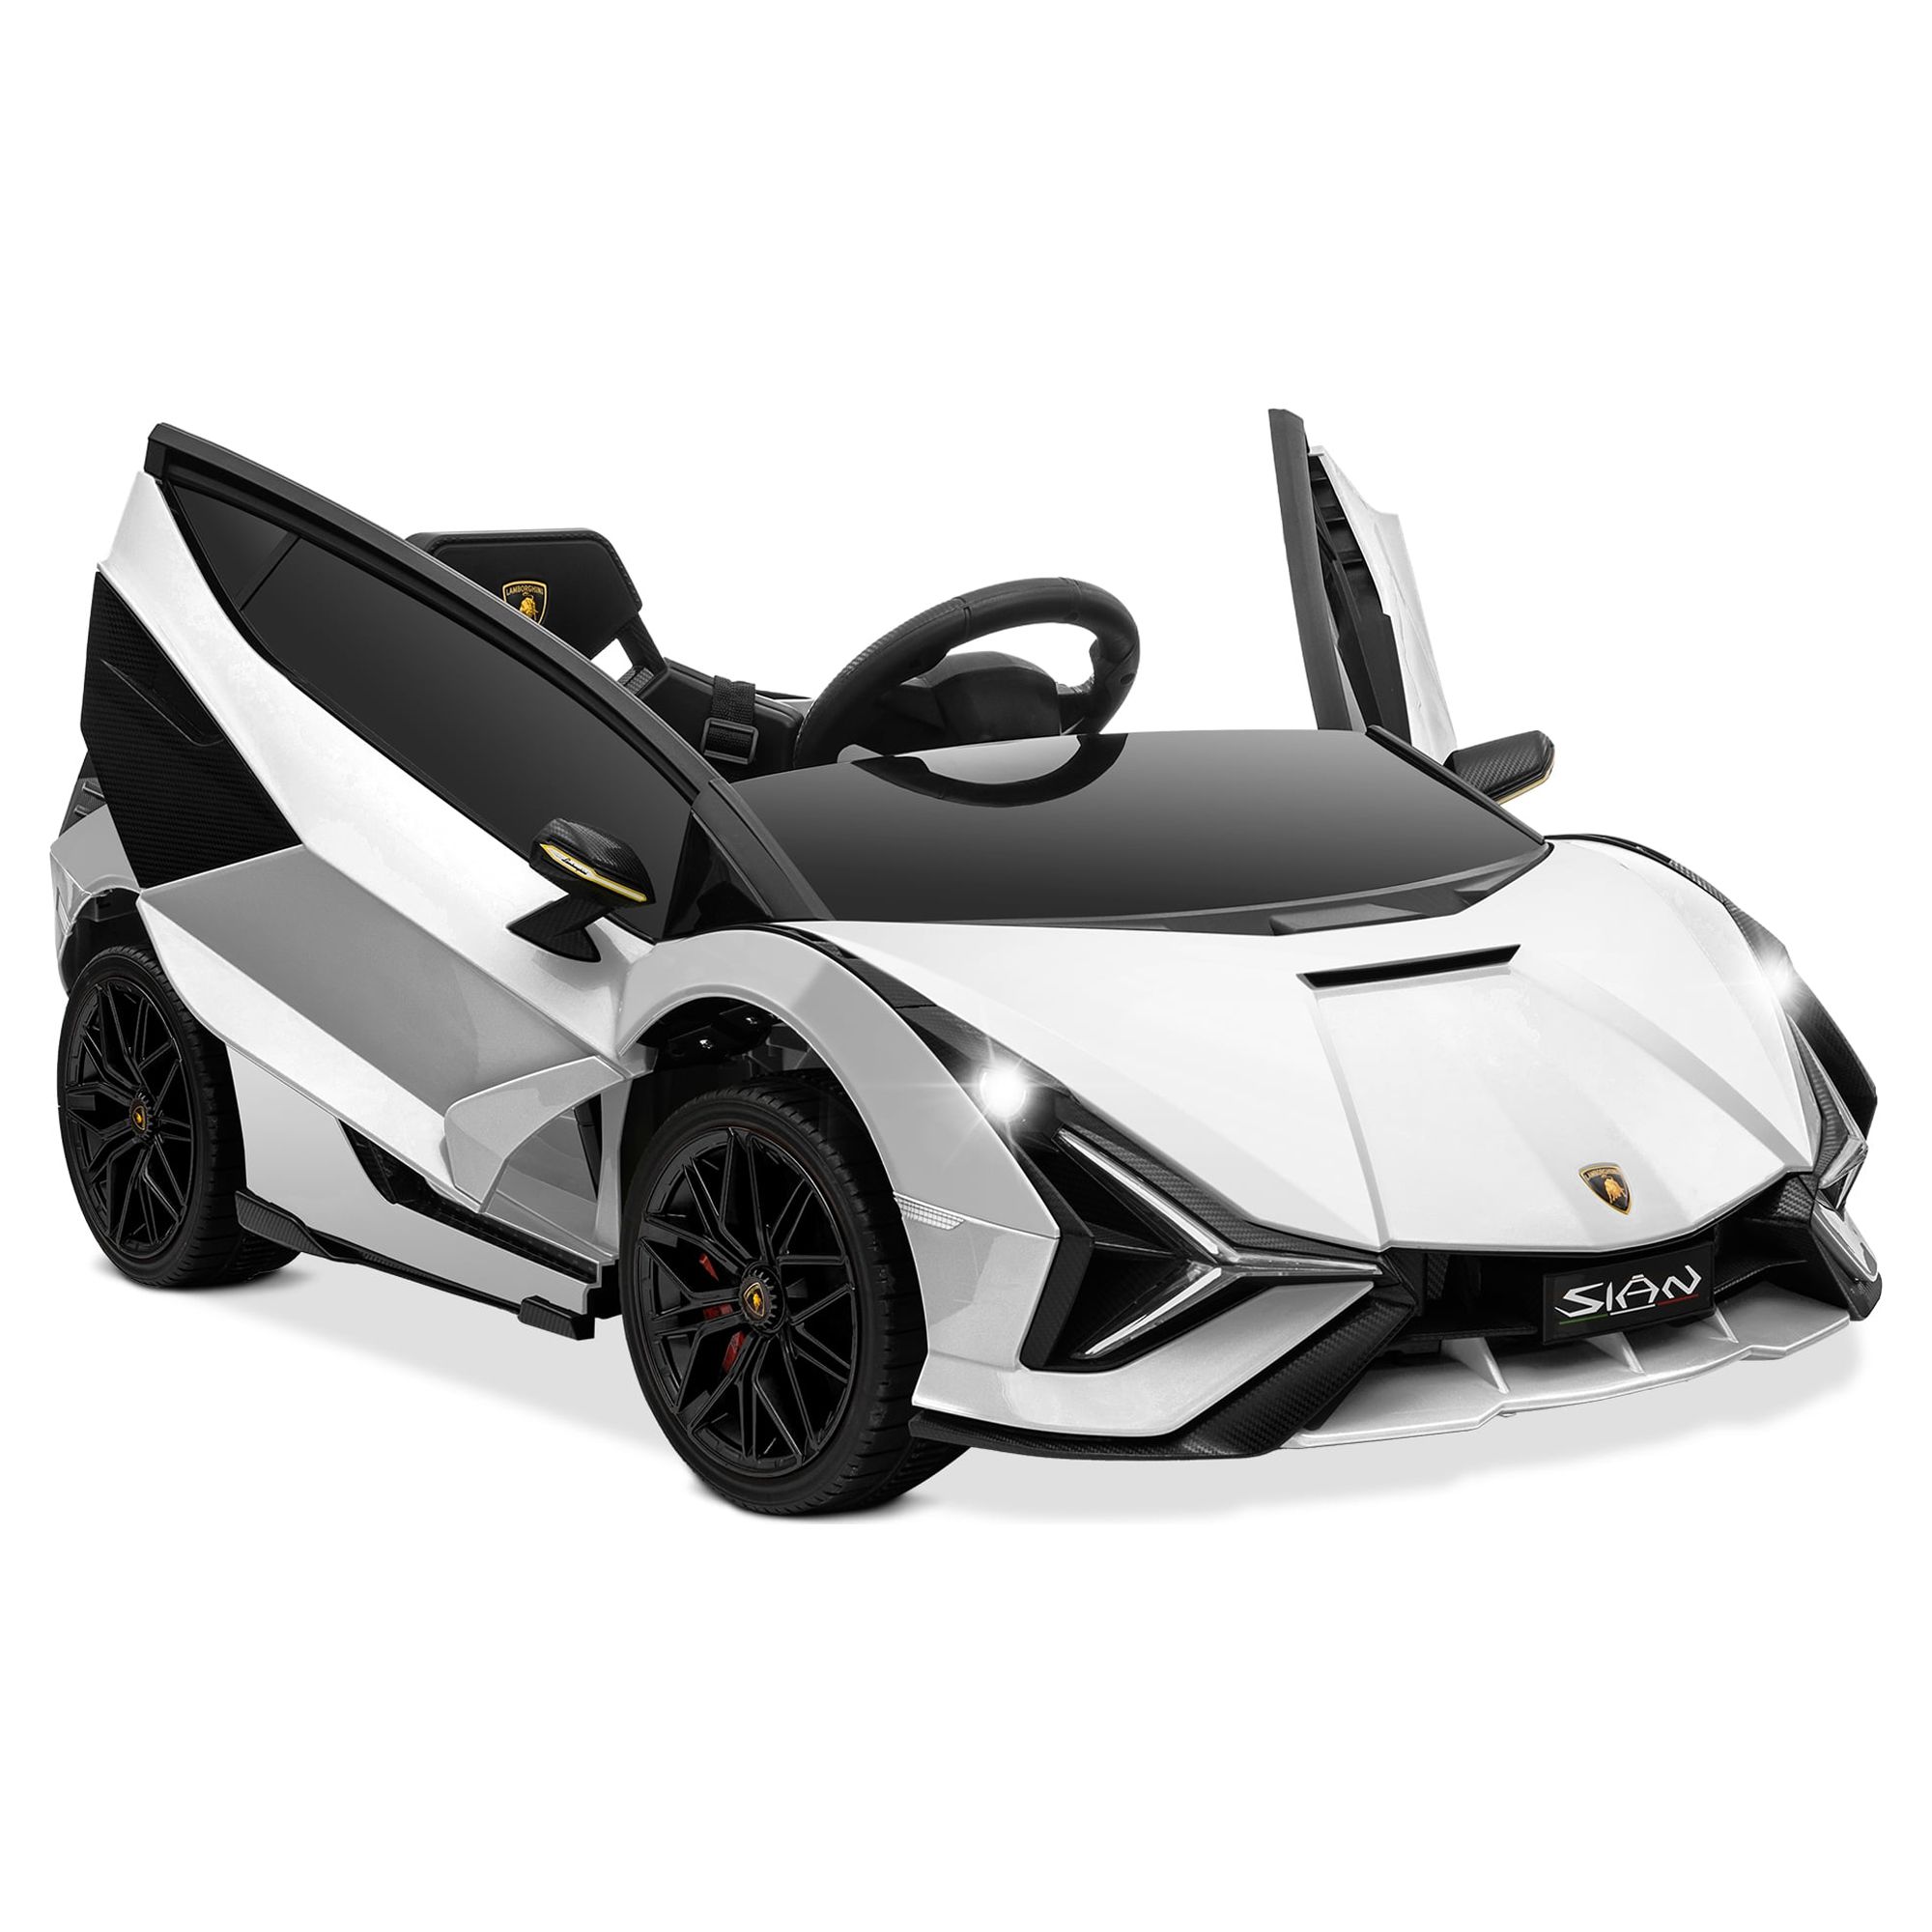 Kidzone Kids 12V Electric Ride On Licensed Lamborghini Sian Roadster Motorized Sport Vehicle With 2 Speed, Remote Control, Wheels Suspension, LED lights, USB/Bluetooth Music, Engine Sounds, White - image 1 of 6